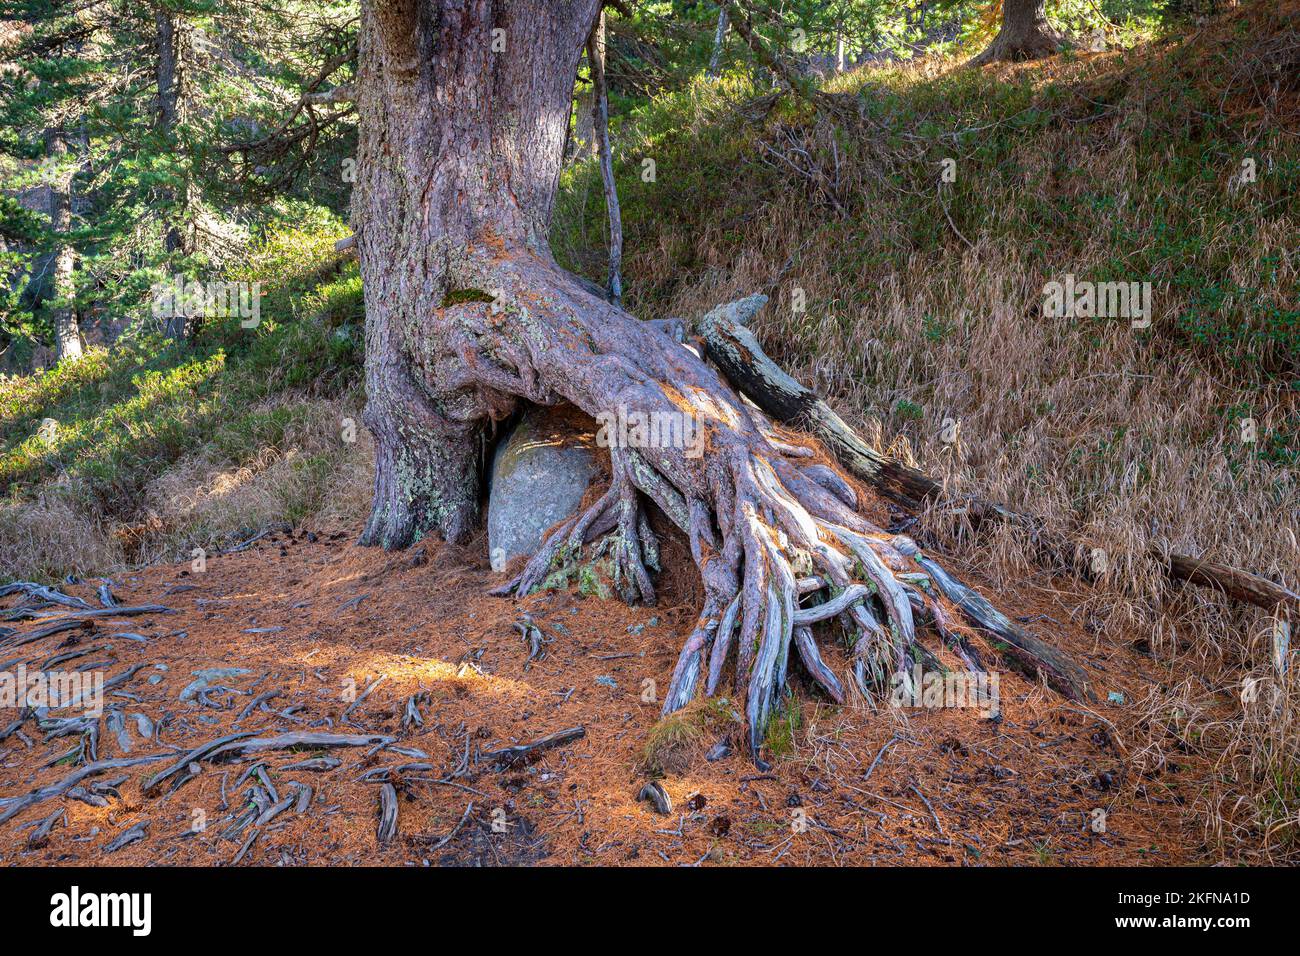 Trunk and roots of a large larch tree (Larix decidua) have grown over a rock. On the forest floor there are countless number of fallen needles. Stock Photo